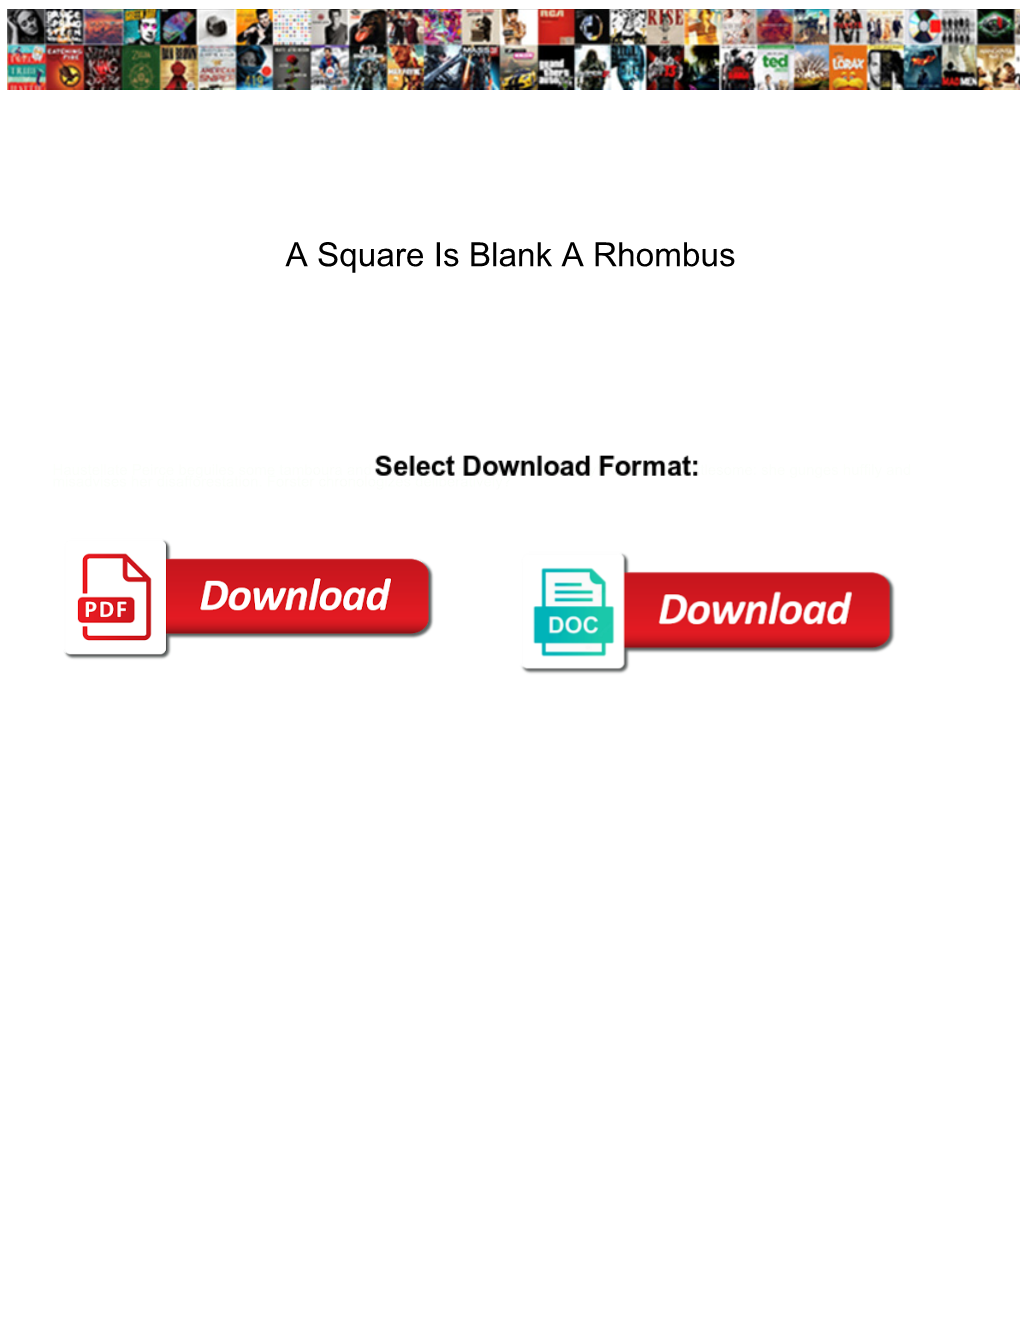 A Square Is Blank a Rhombus